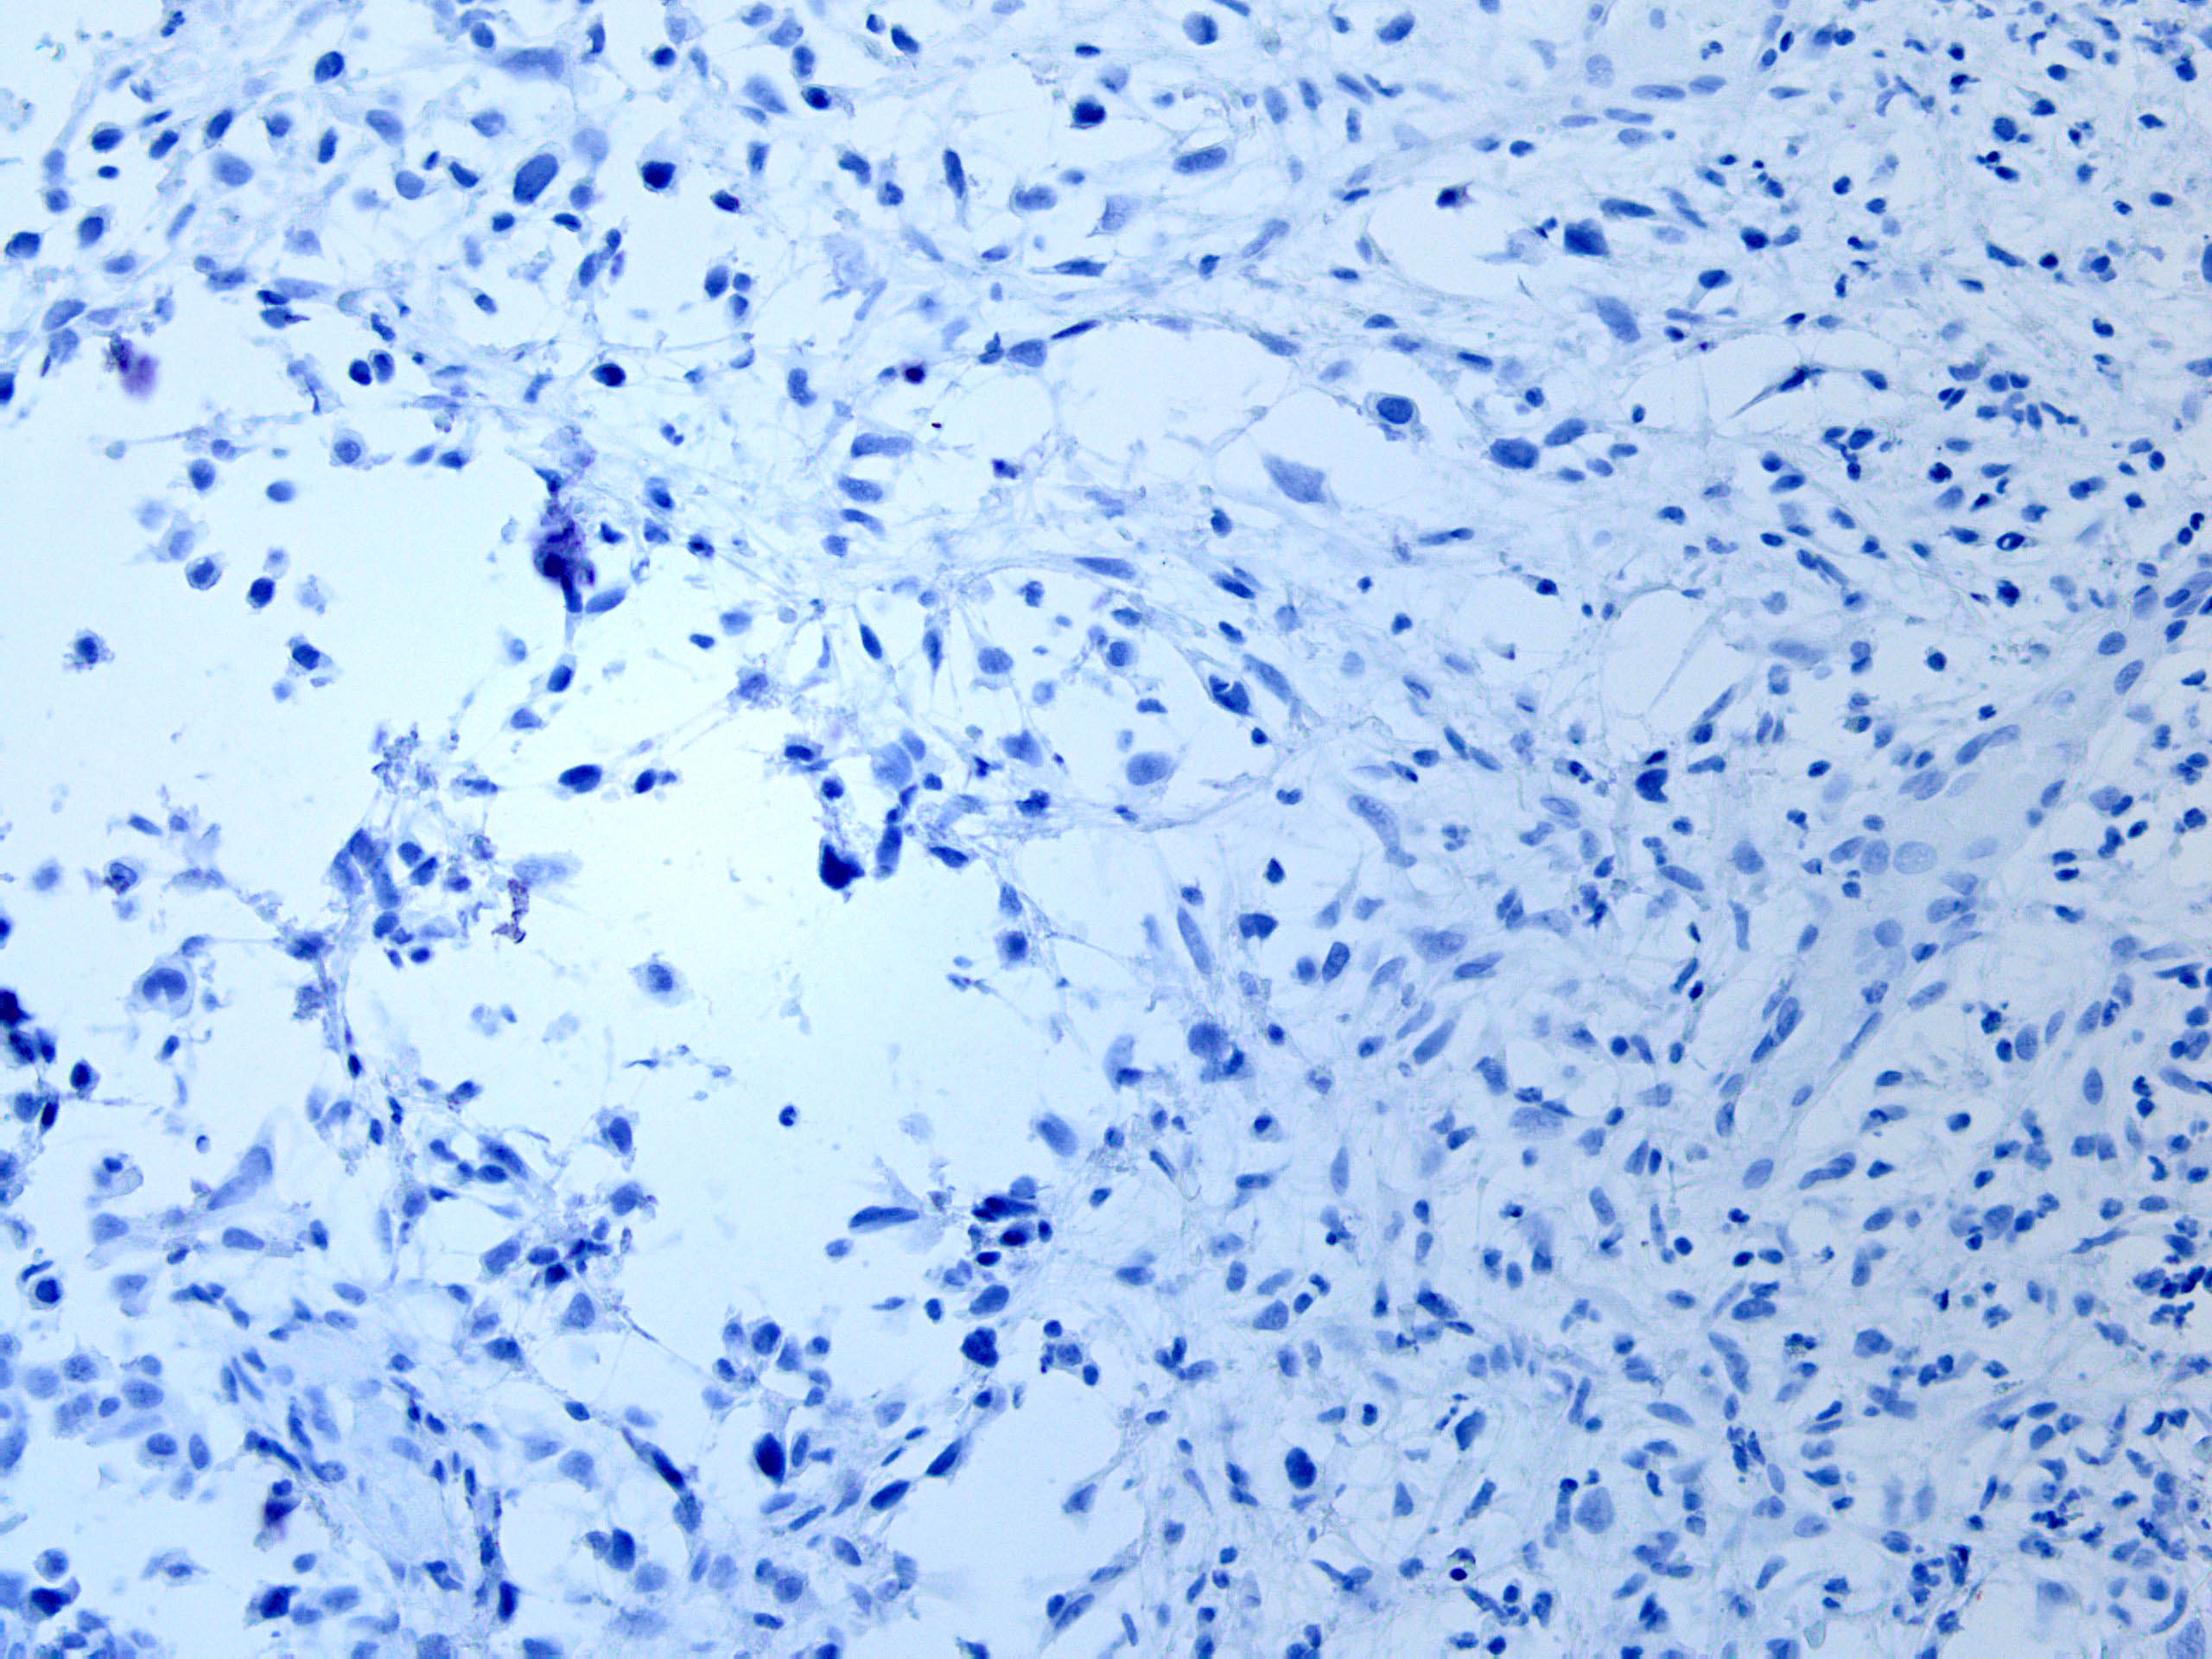 Spindle cell carcinoma